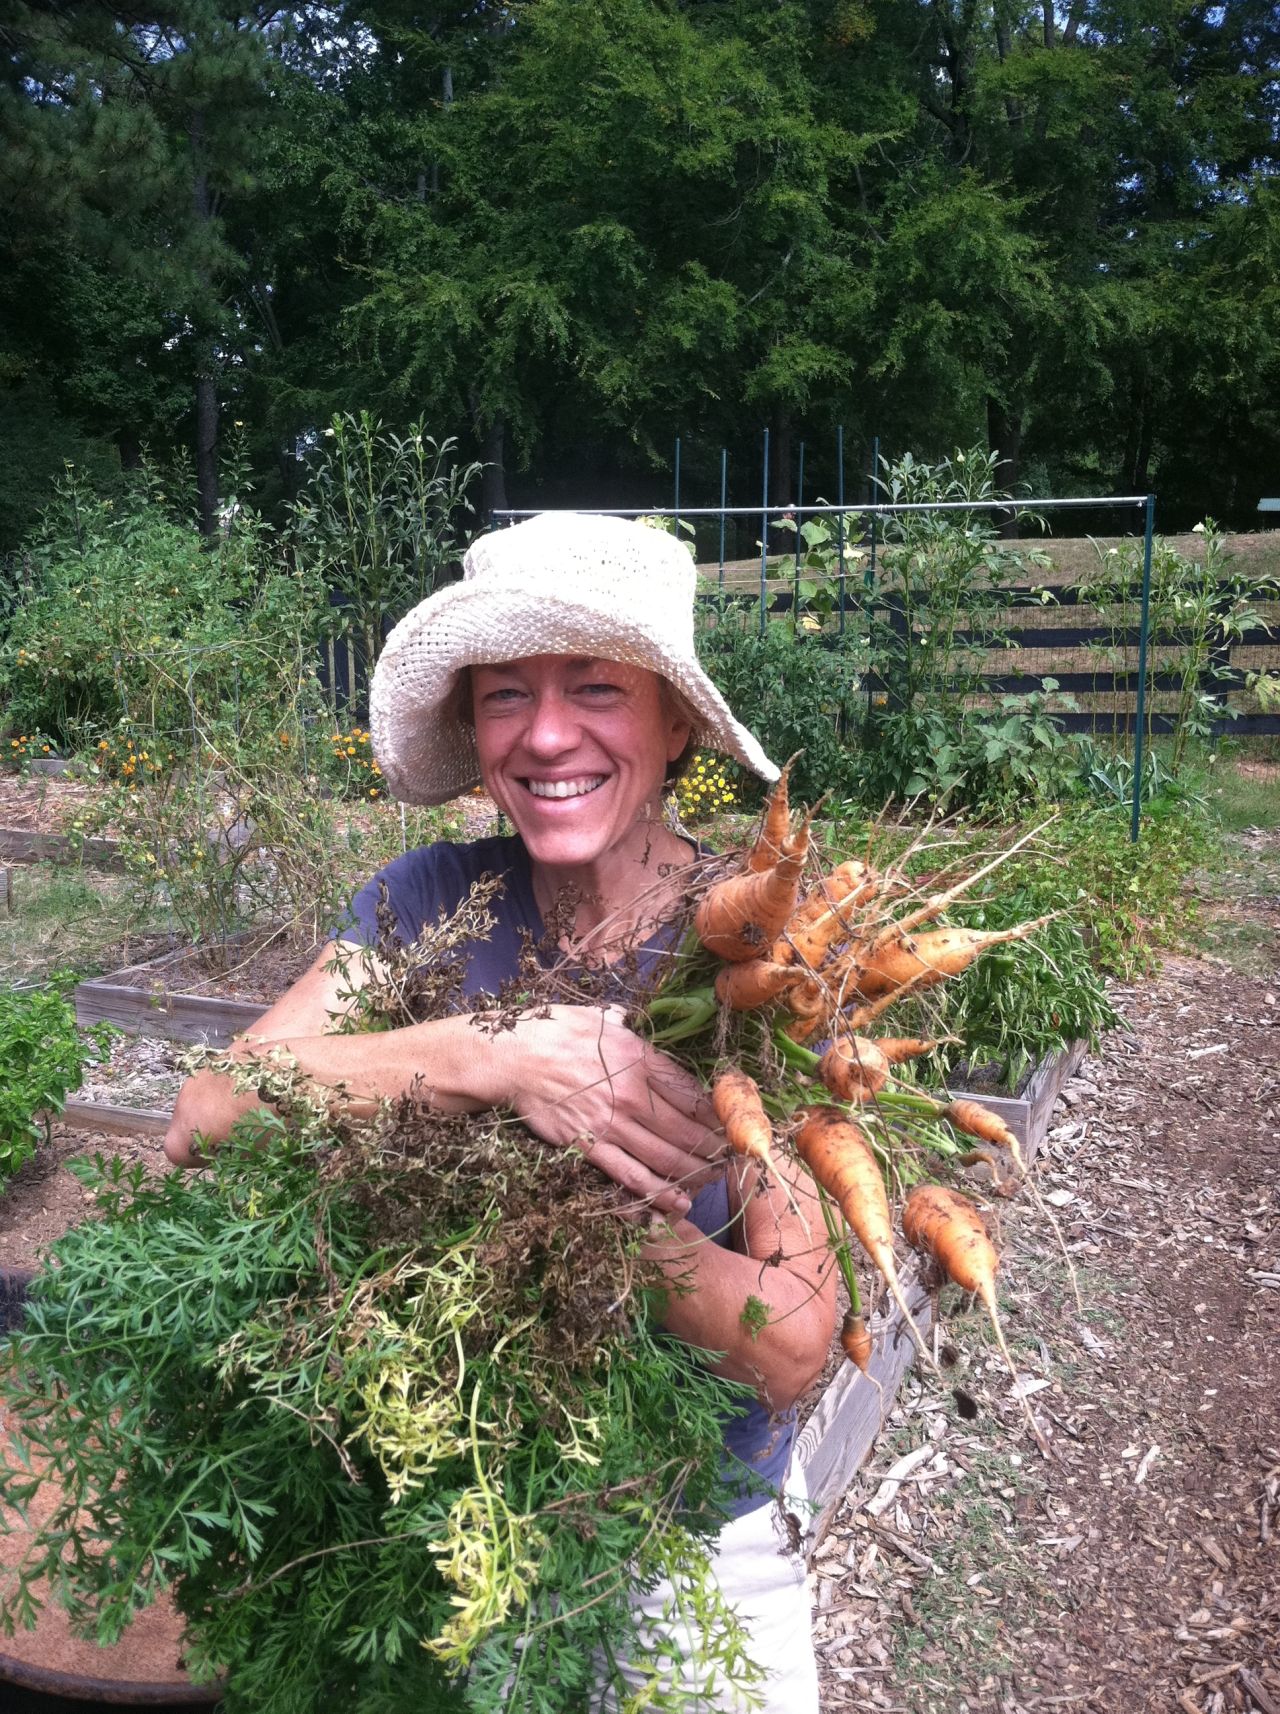 In 2010, Jackson grew carrots for the first time in her garden plot at the Alpharetta Community Garden in Georgia. "I felt fantastic losing weight and getting healthy," she says.